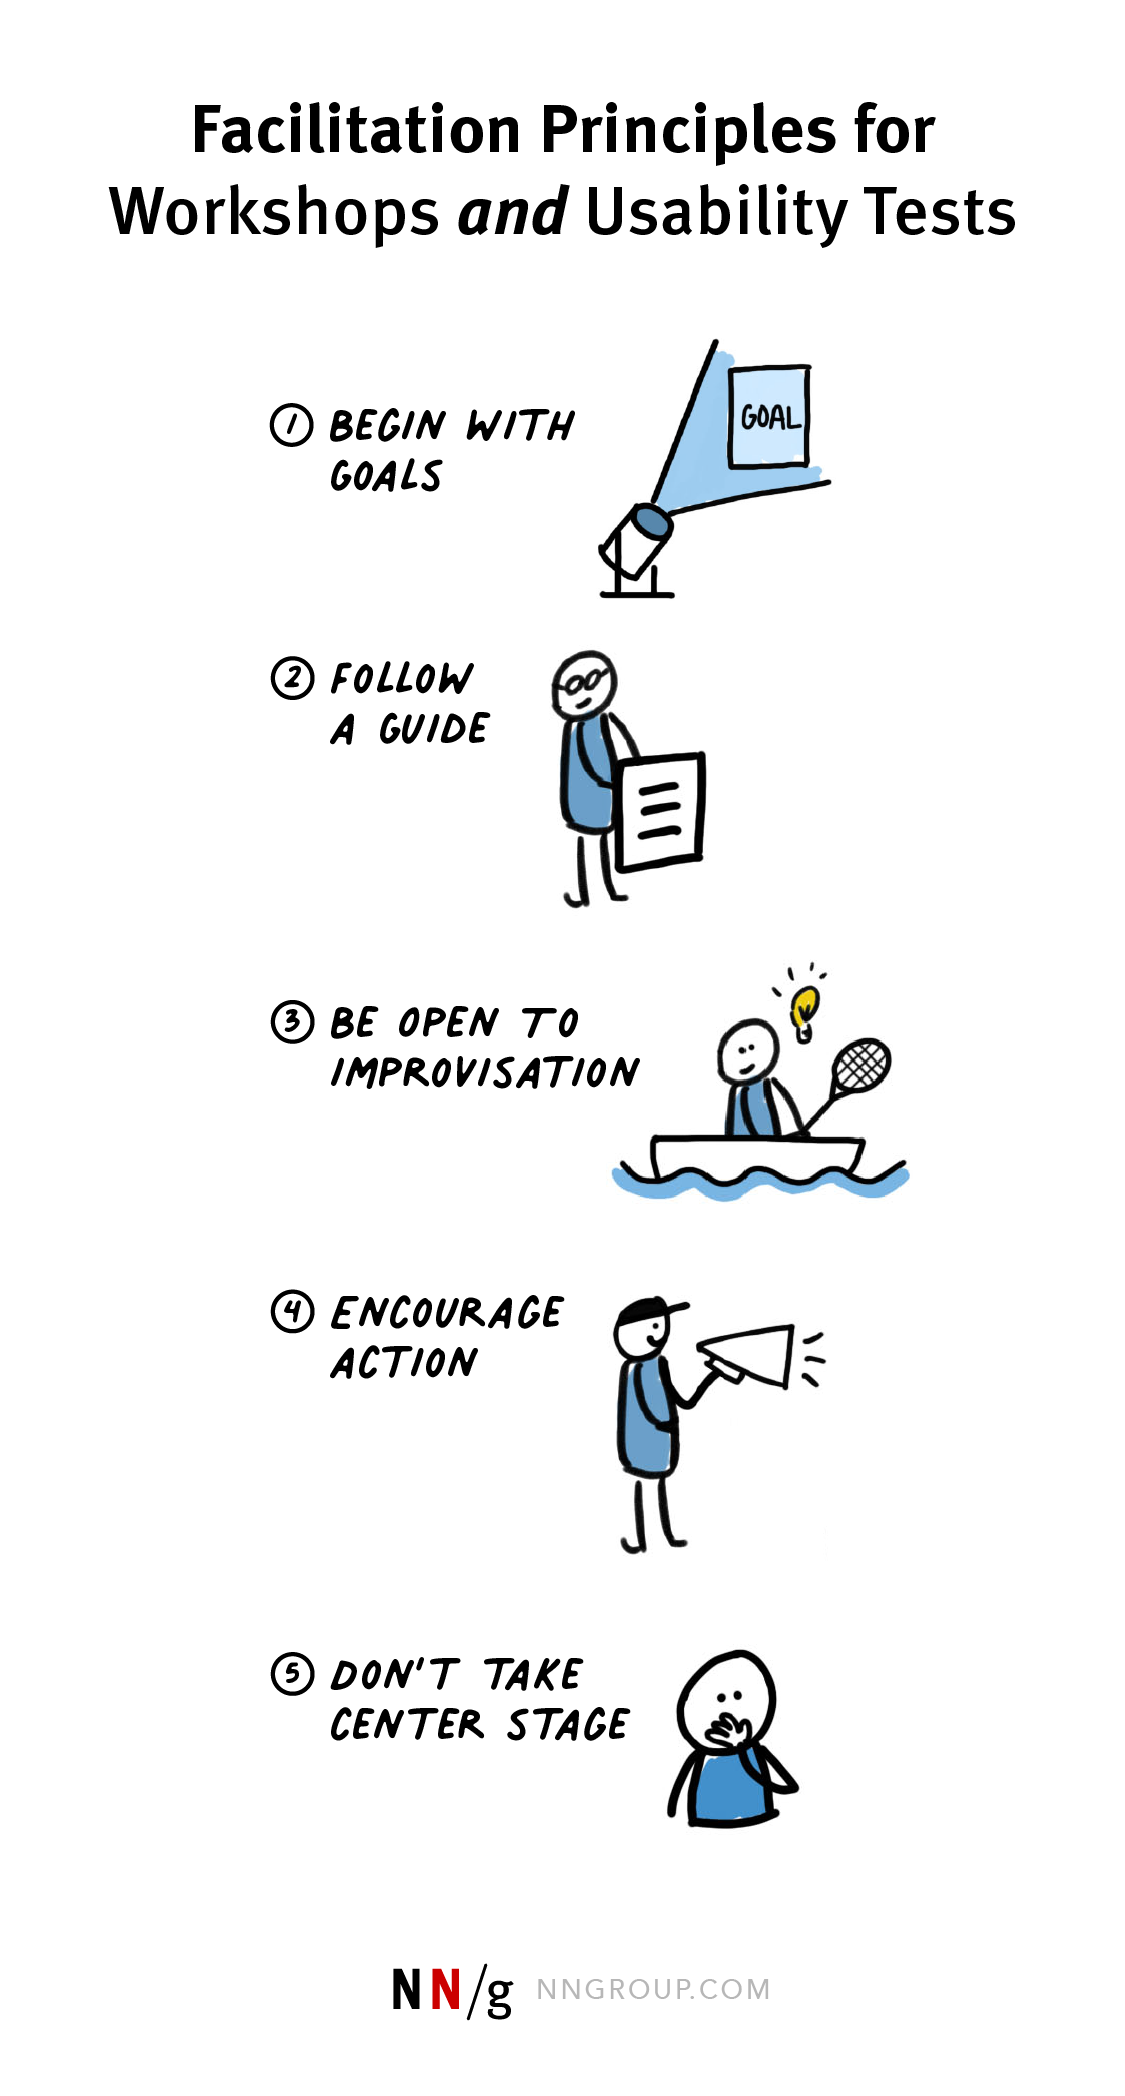 Facilitation principles that transfer between workshops and usability tests: 1) begin with goals (image of sptloght on the word 'goal), 2) follow a guide (iamge of a stick person in glasses holding a big sheet of paper), 3) improvise (image of person in a boat with a tennis racquet in hands and a lightbulb over head) 4) inspire action (image of a person in baseball had holding a megaphone), 5) employ intentional silence (image of a person with their hand over their own mouth)